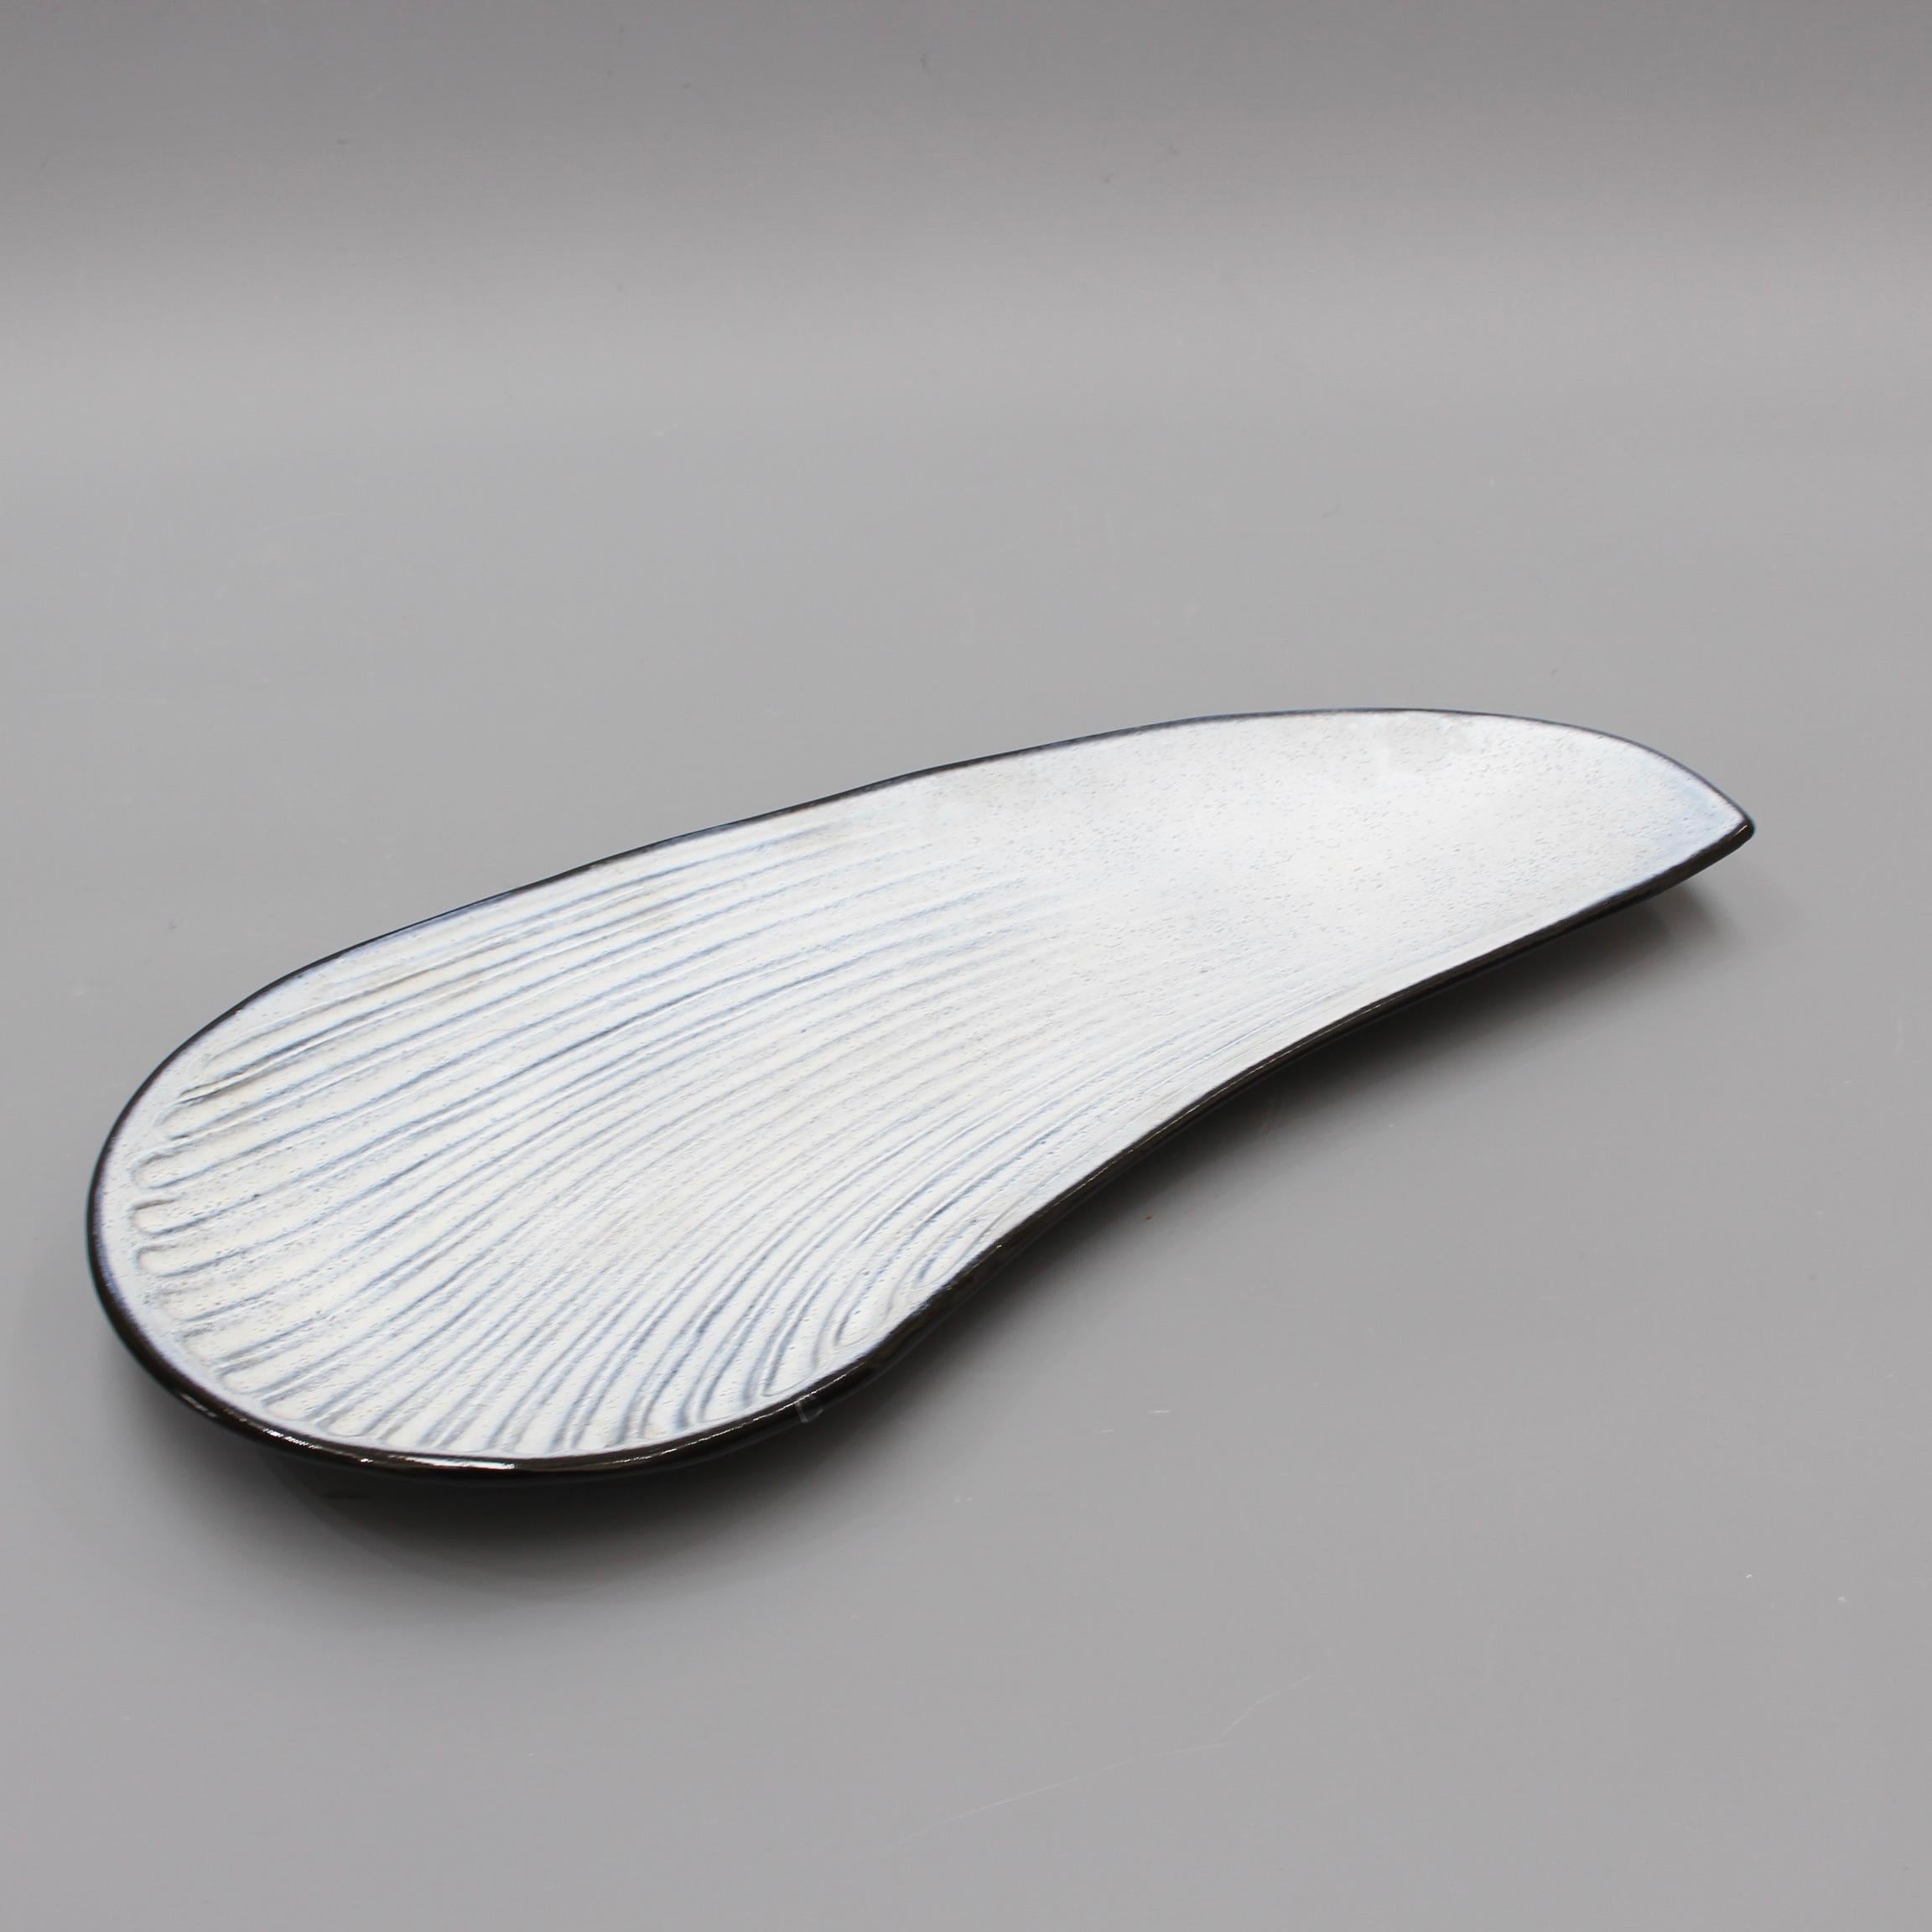 Glazed Oyster Shell Shaped Ceramic Tray by Marcel Guillot, circa 1960s